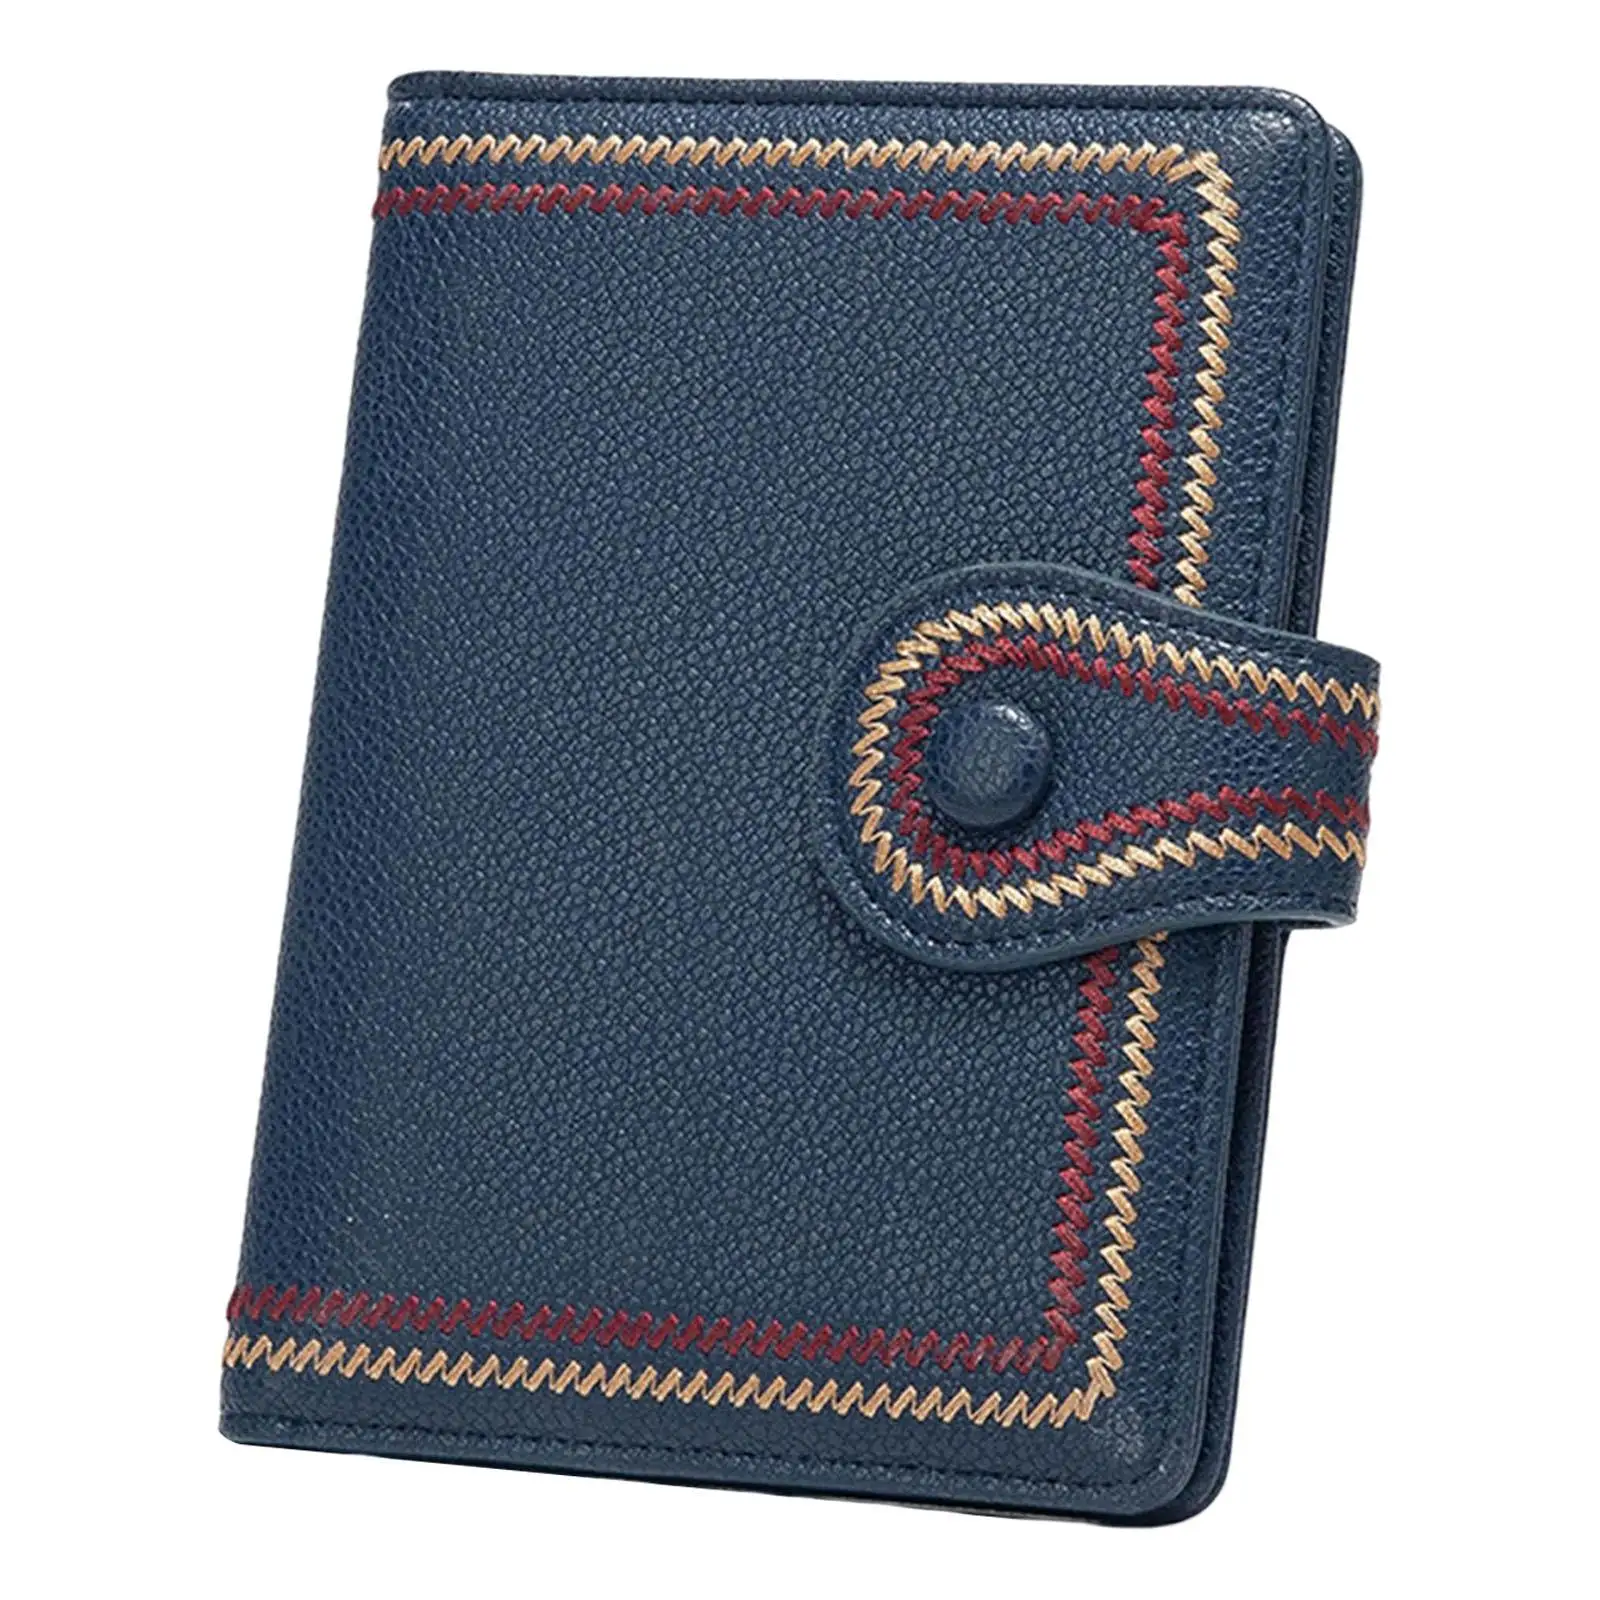 Leather Passports Cover for Cards Travel Passports Holder Wallet Document Organizer Case Men Women